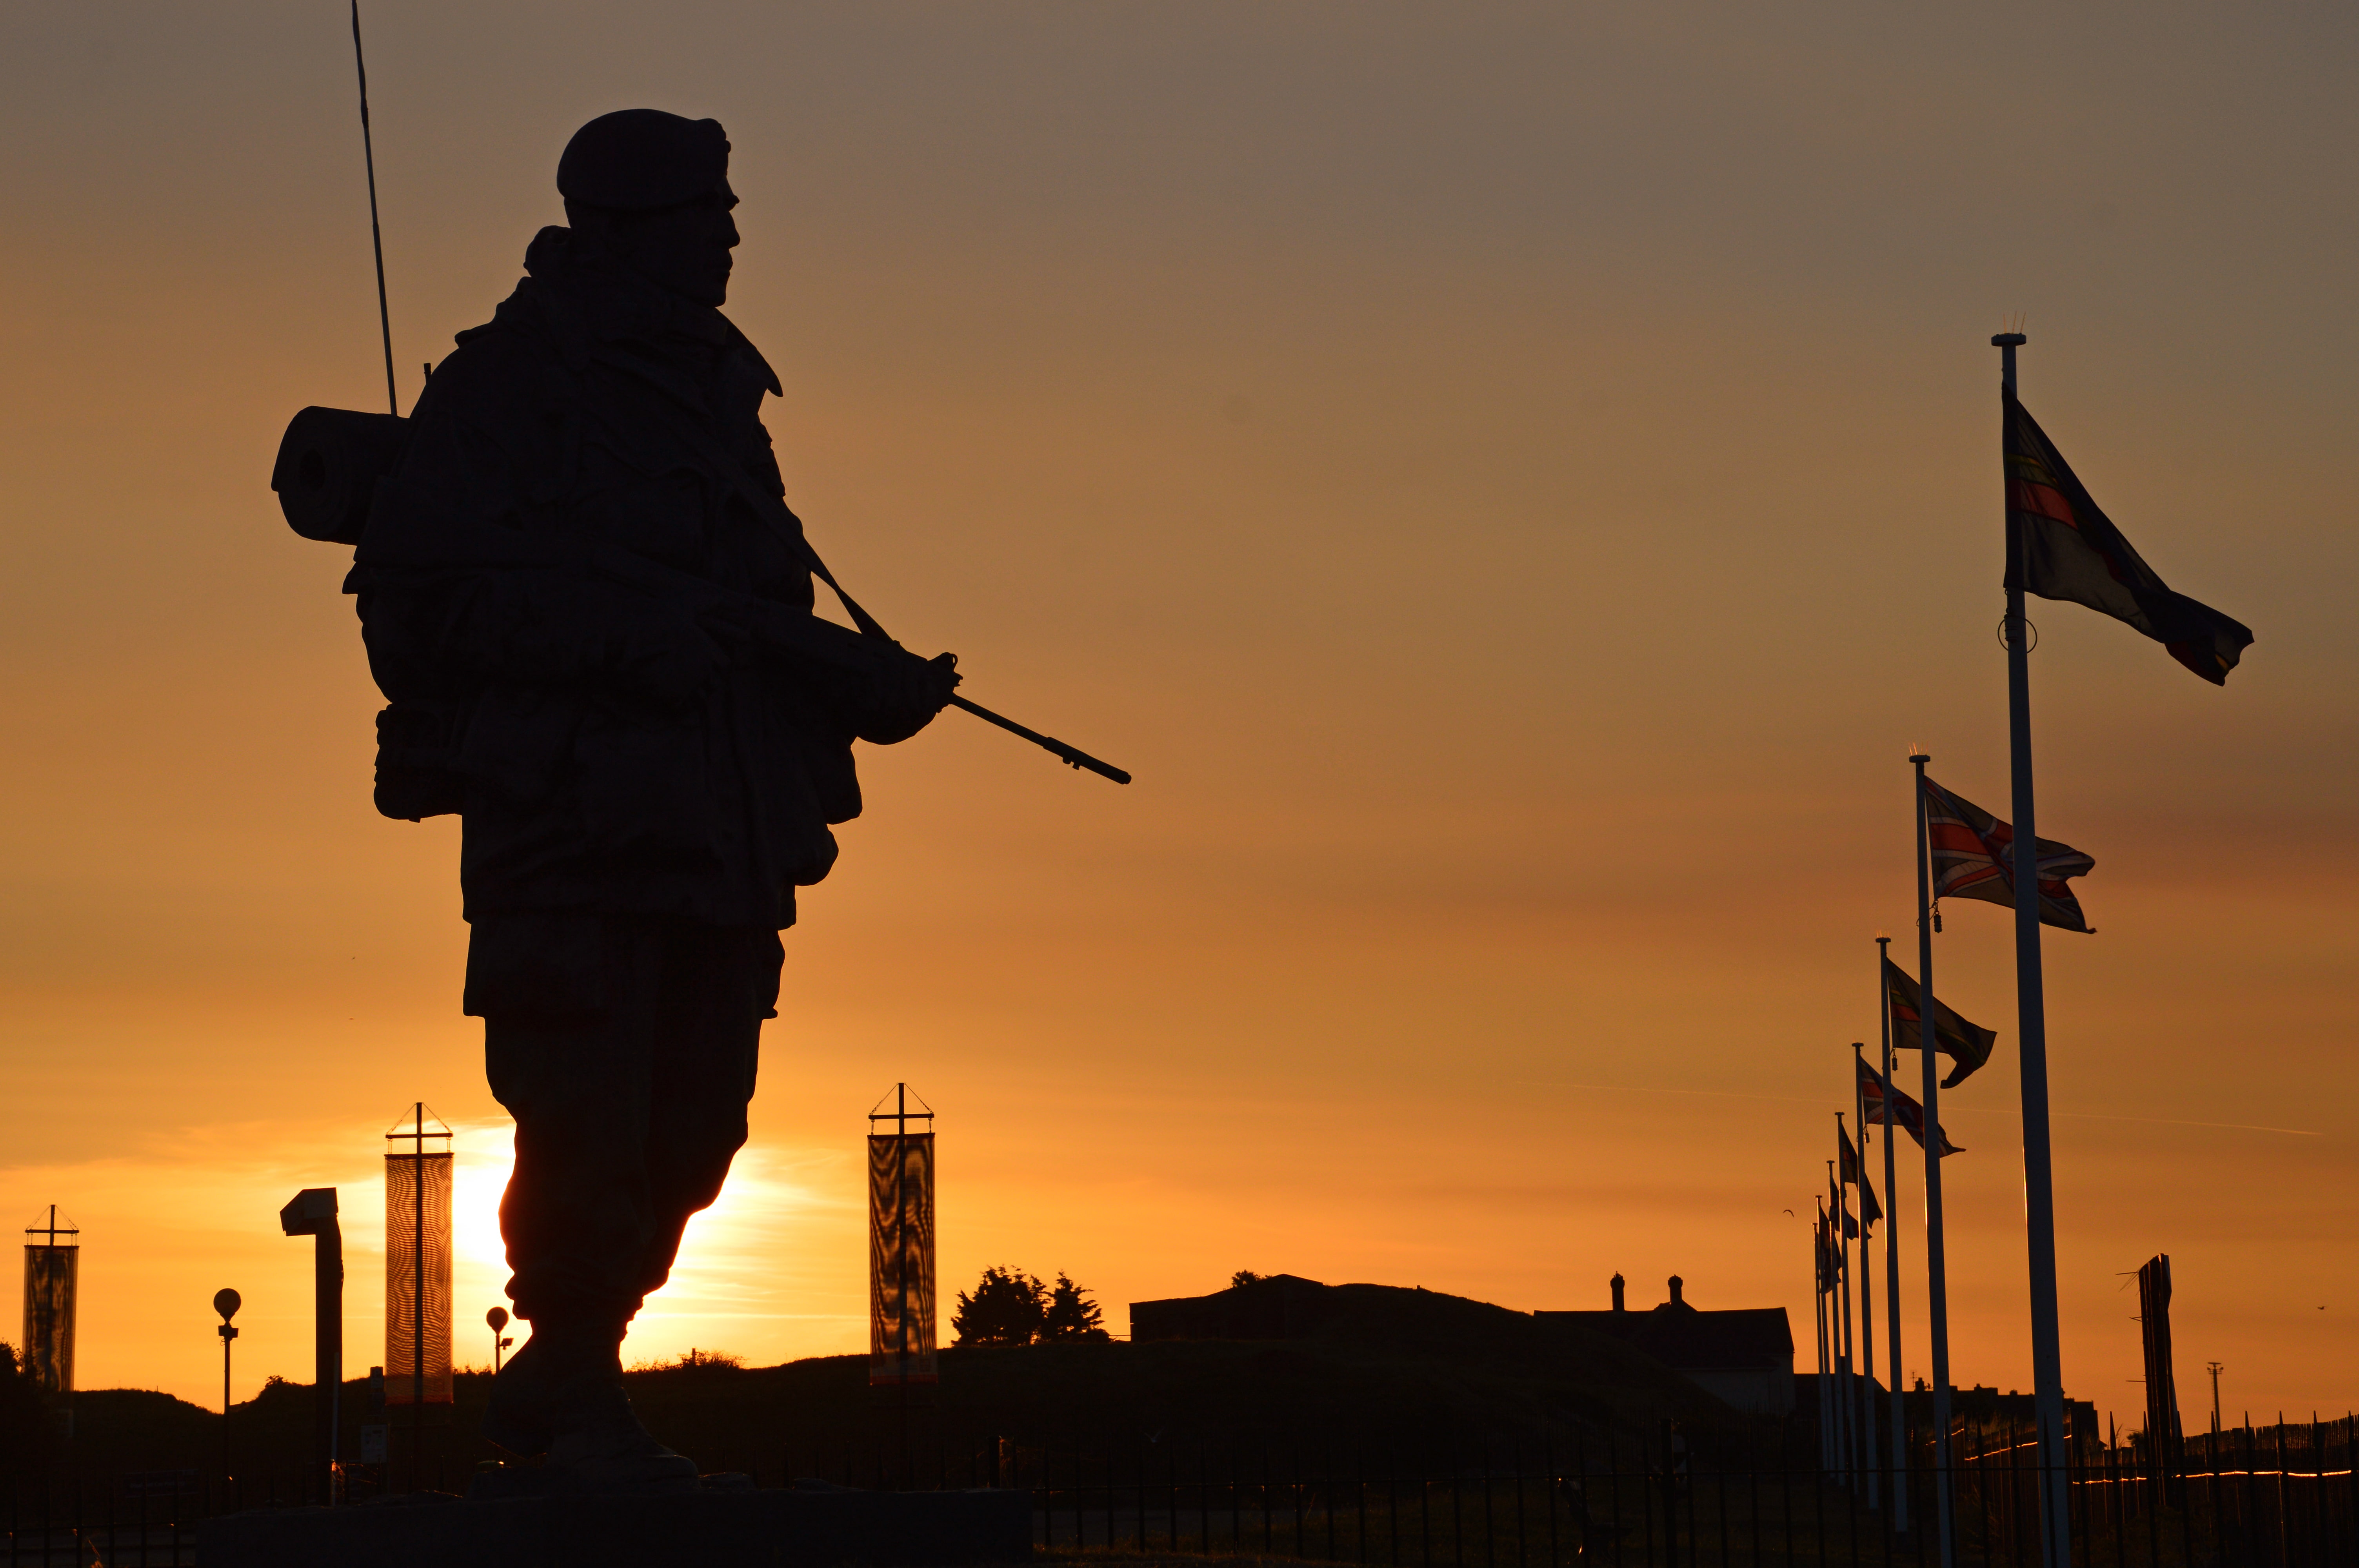 the sun, sunset, weapons, silhouette, soldiers, Royal, equipment